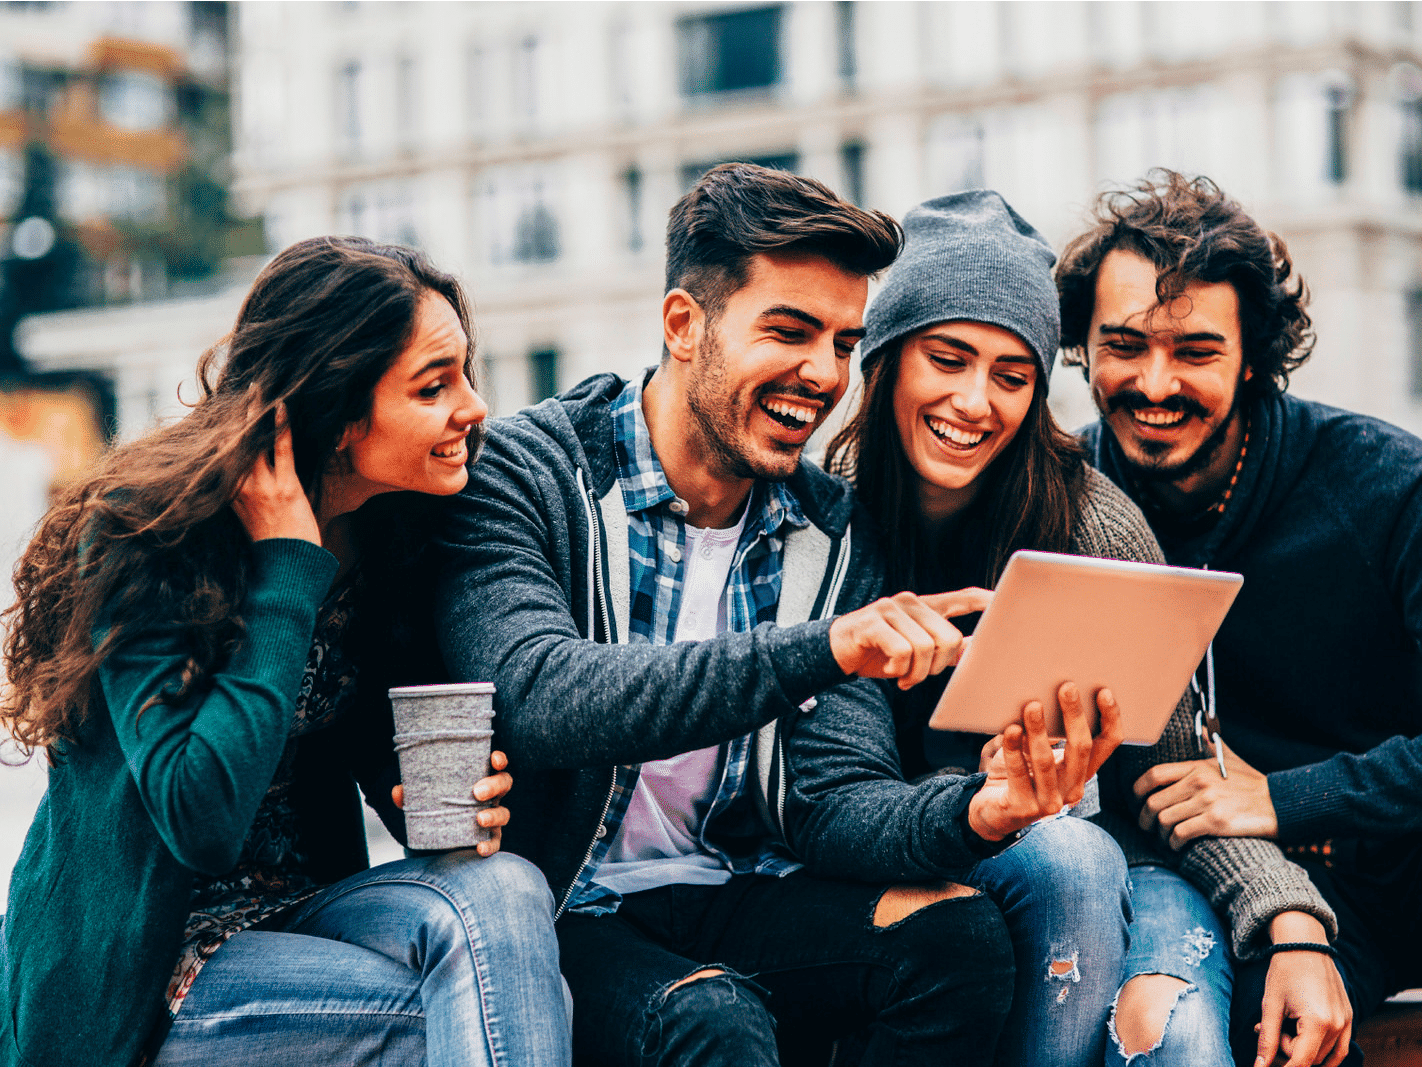 7 Expectations of Millennial Audience that Brands Should Meet